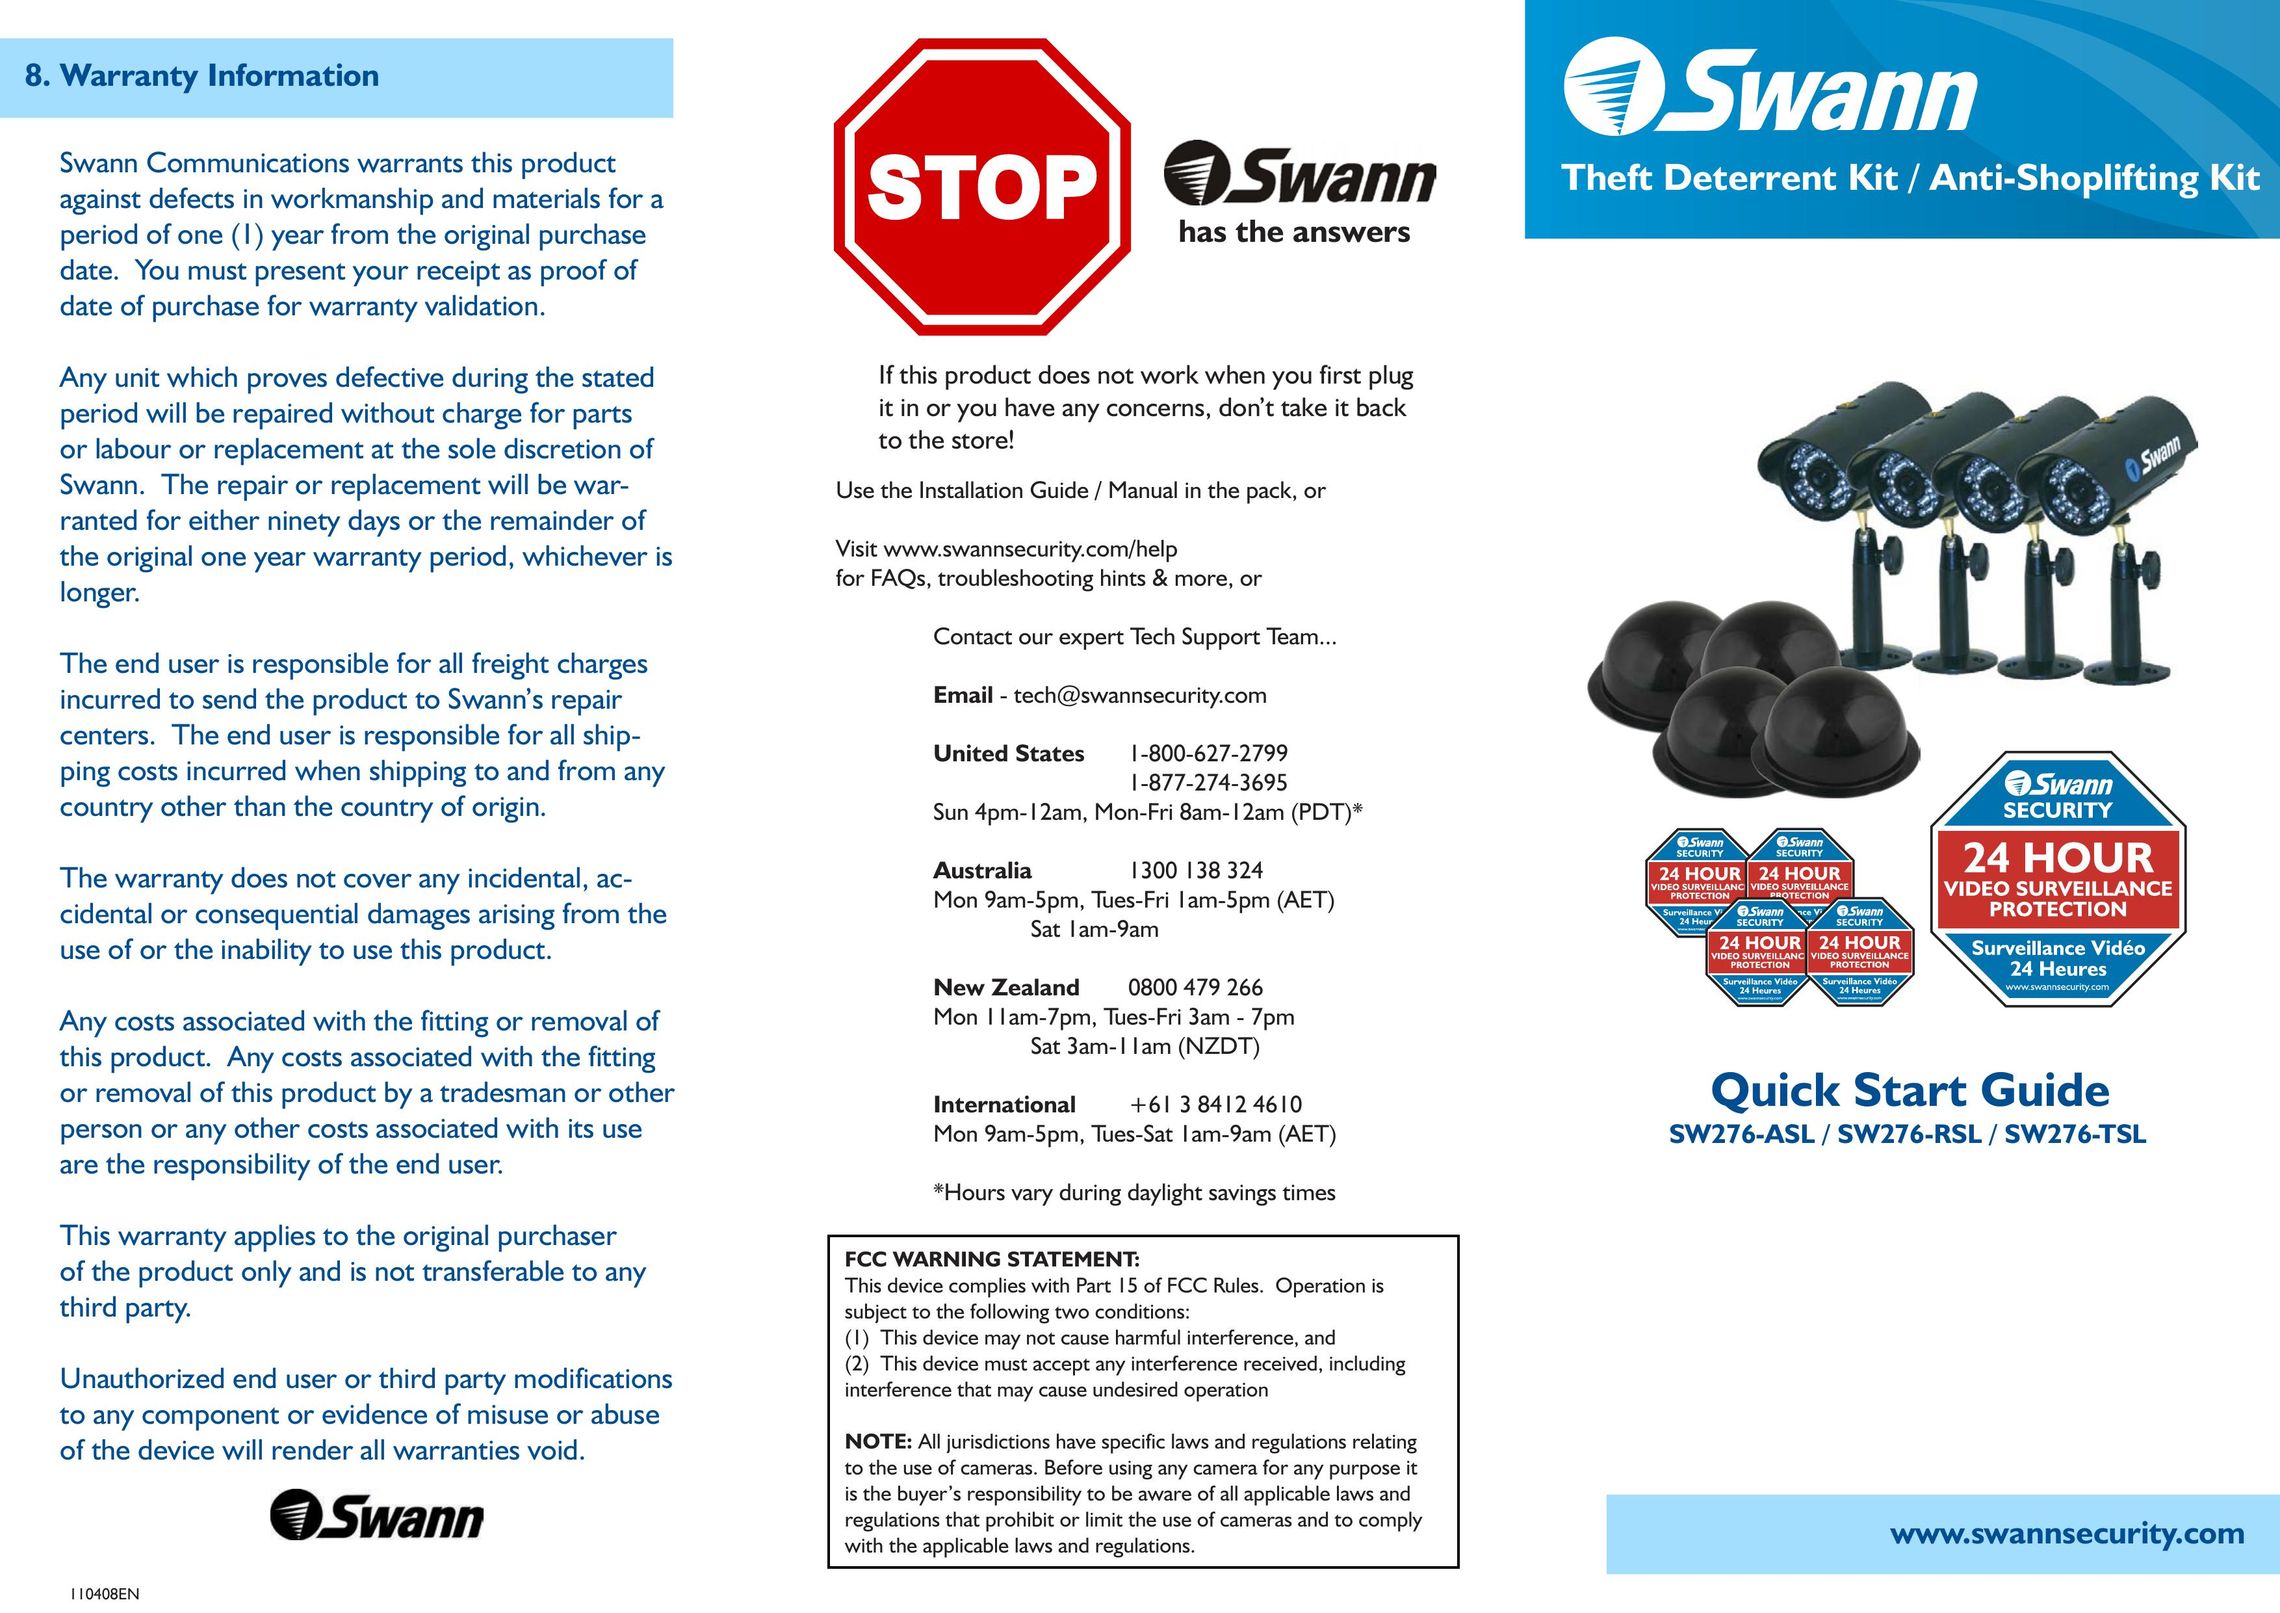 Swann SW276-TSL Home Security System User Manual